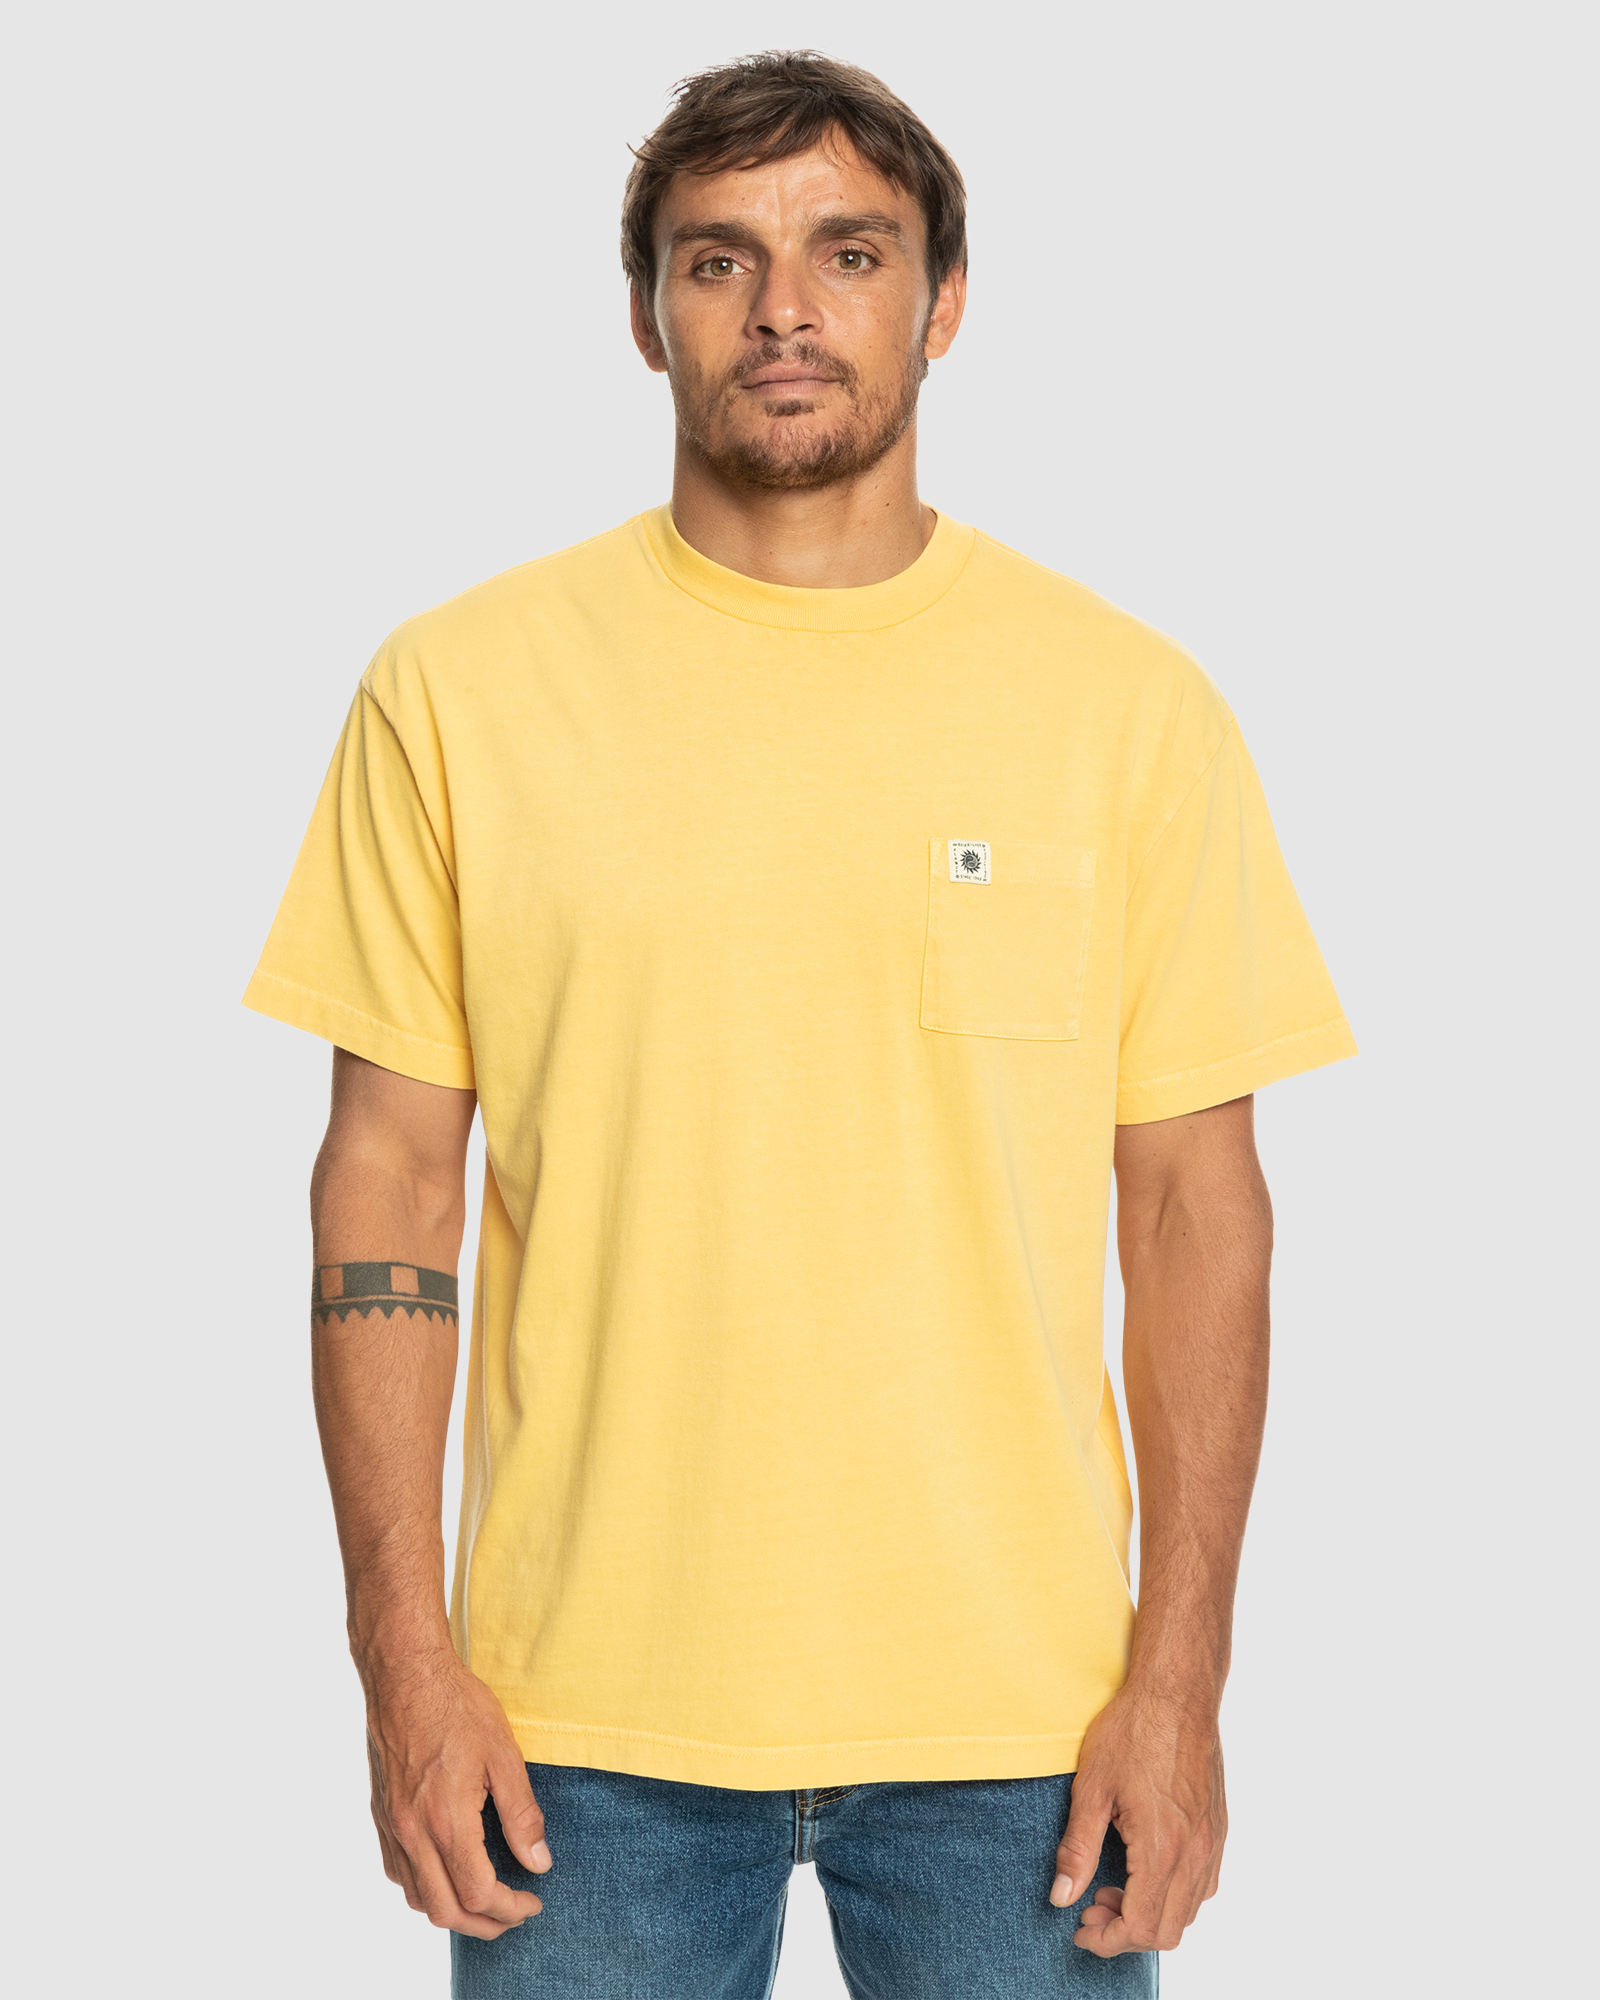 Quiksilver Mens The Natural Dye Tee - Wheat | SurfStitch